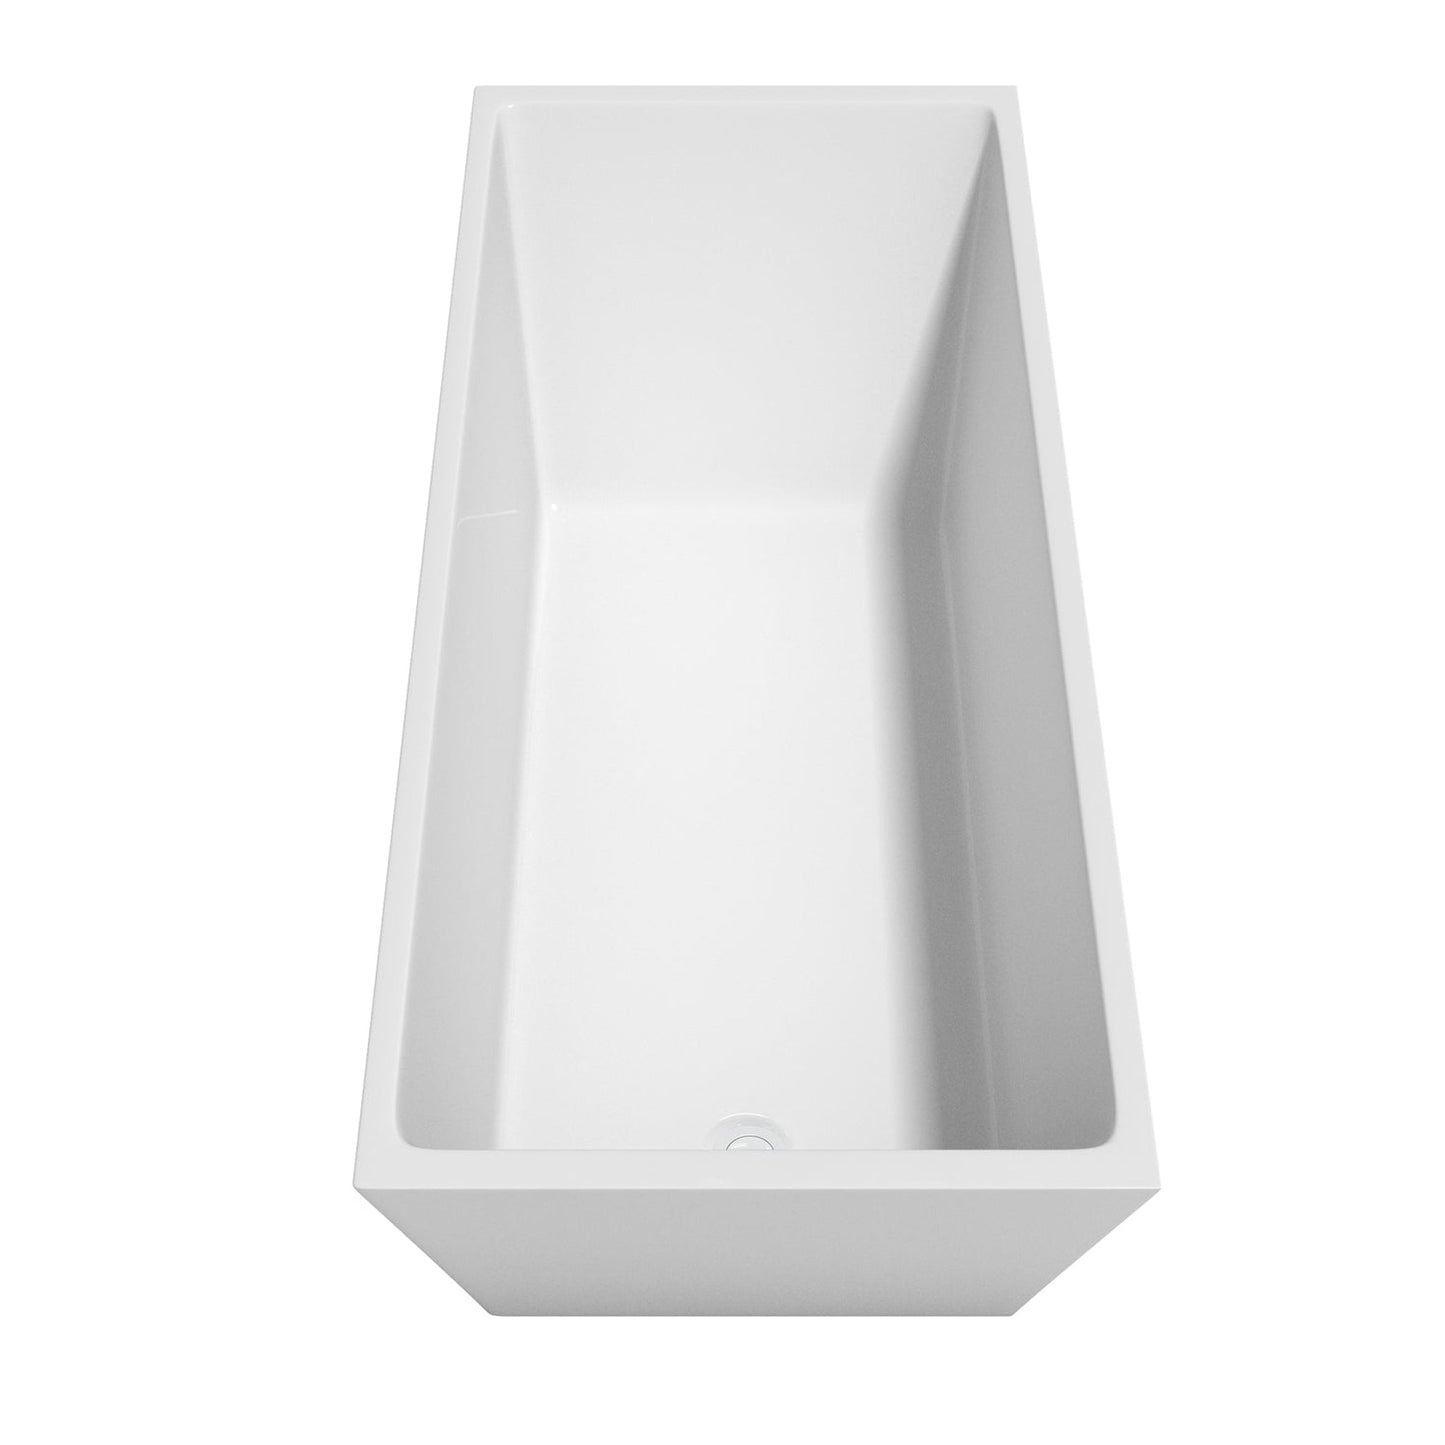 Wyndham Collection Hannah 67" Freestanding Bathtub in White With Shiny White Trim and Floor Mounted Faucet in Matte Black